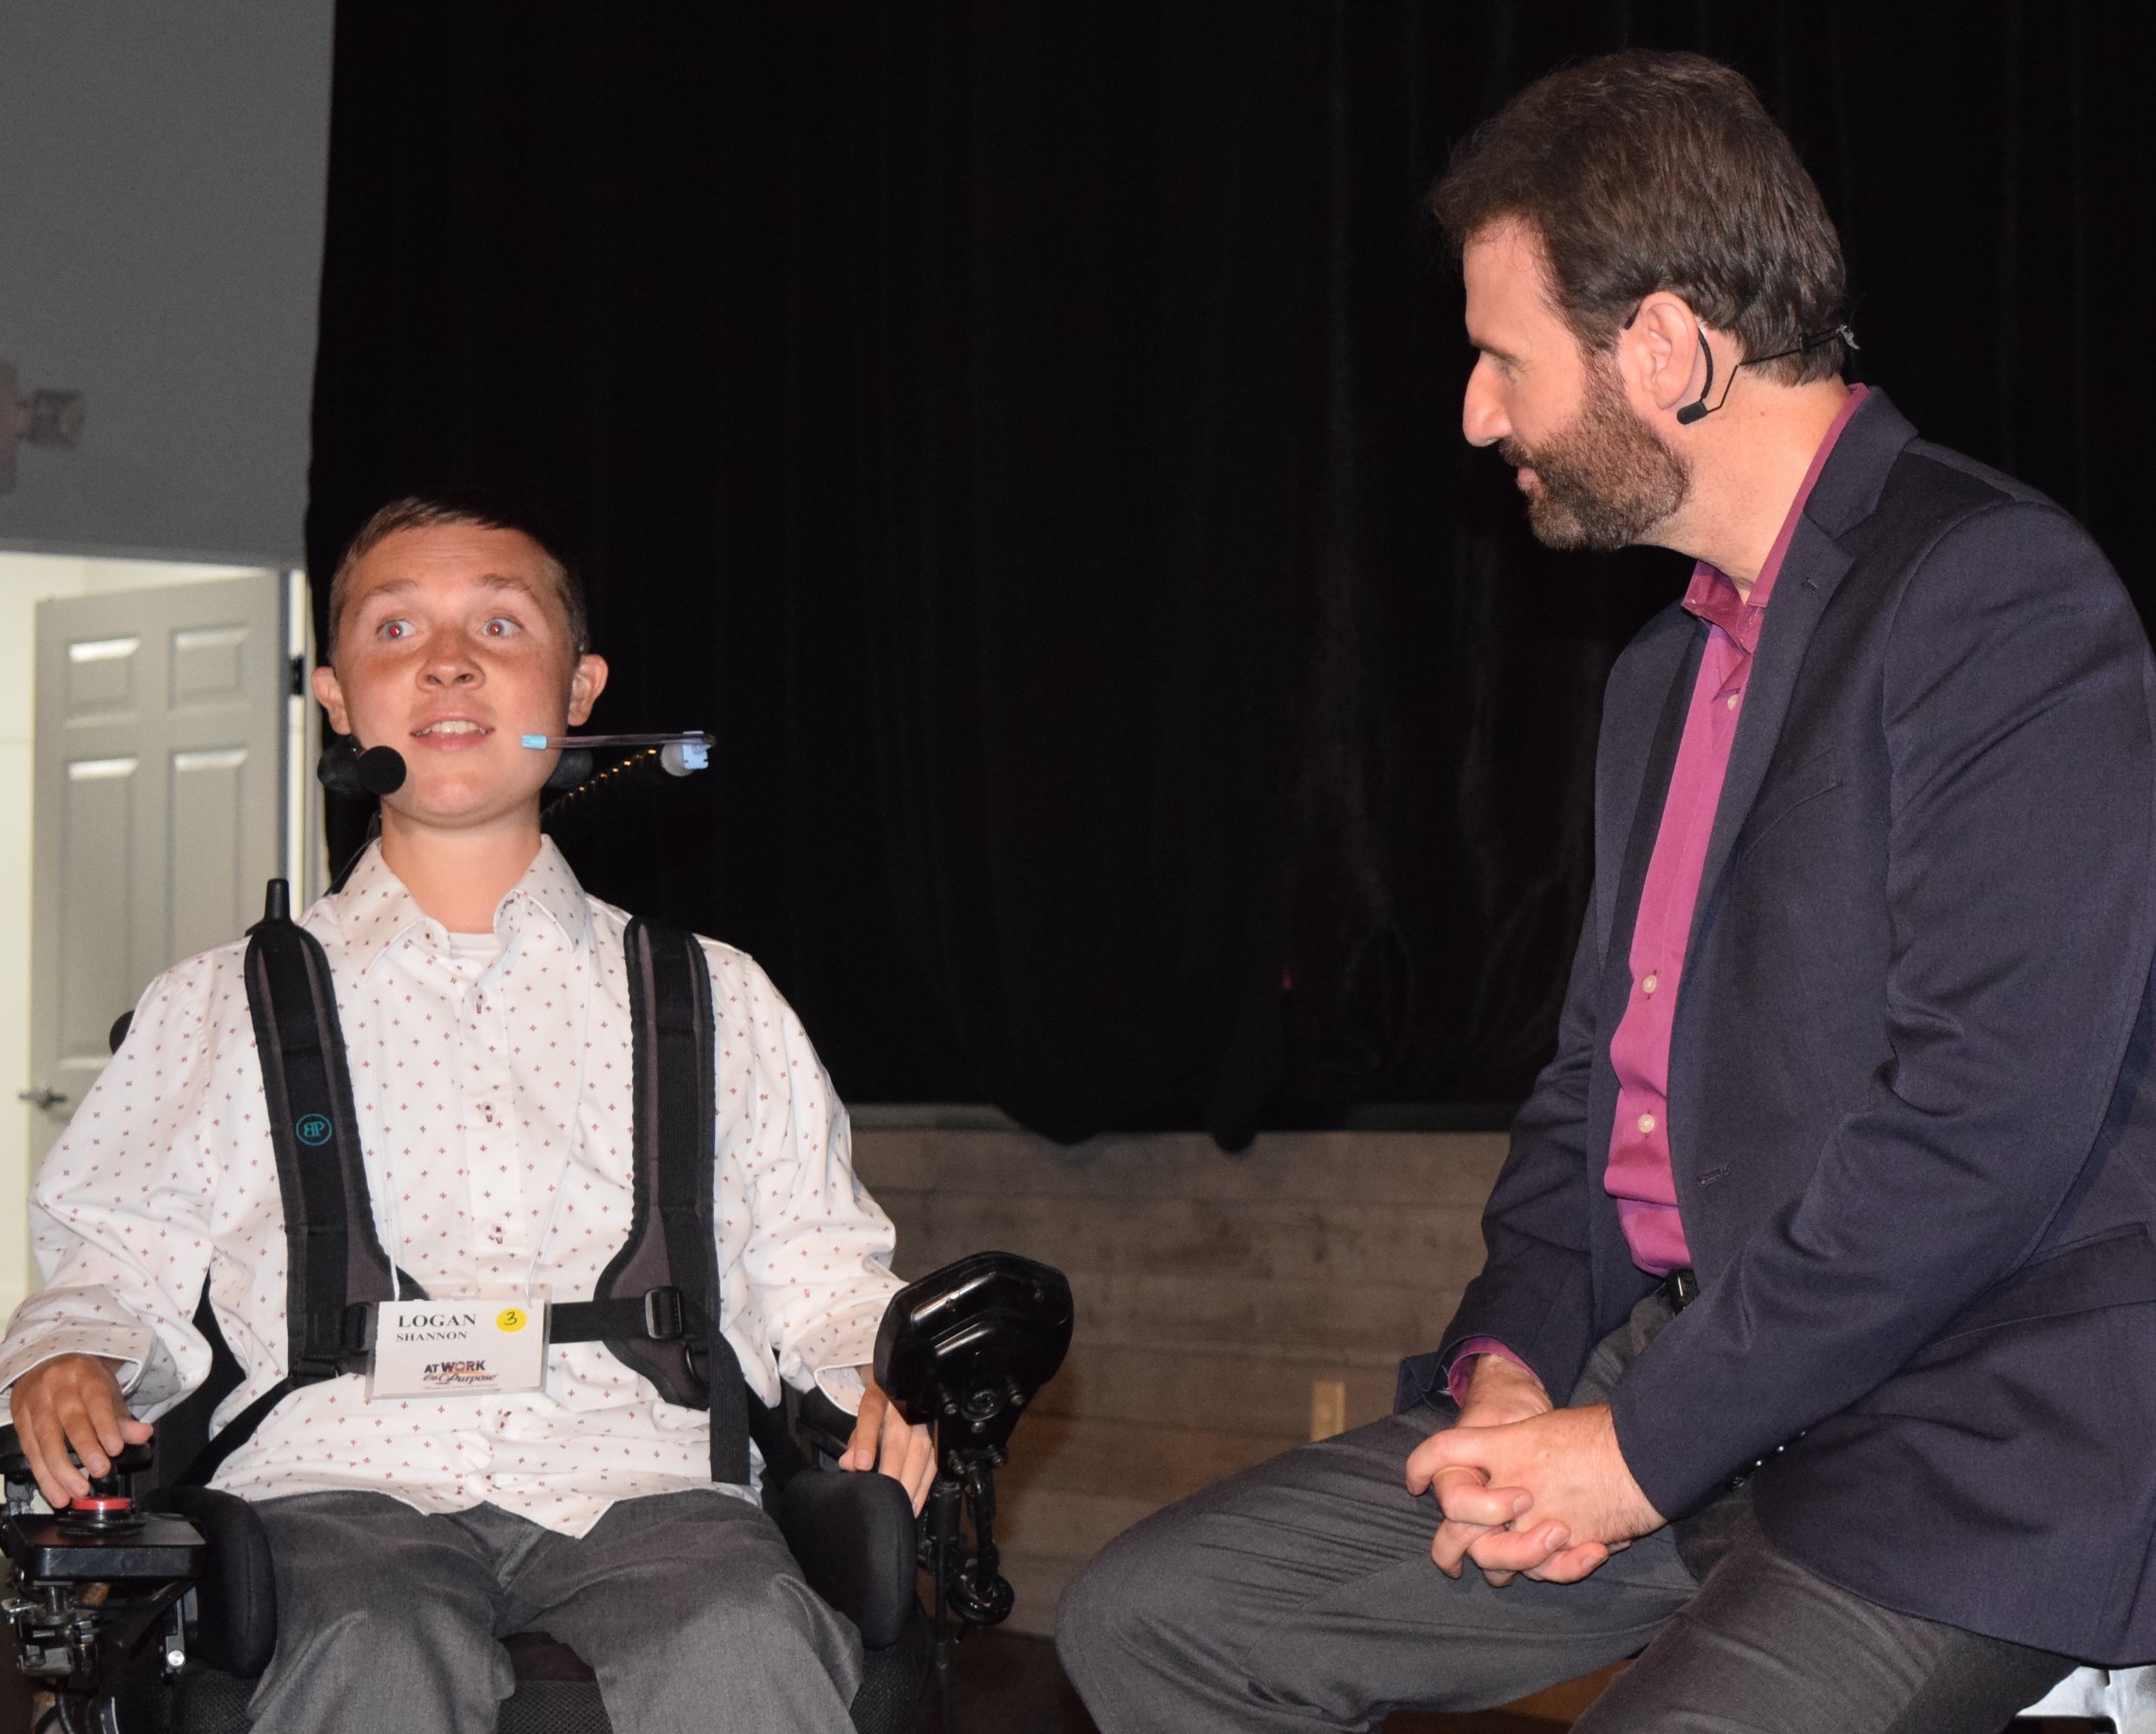 Logan Shannon speaks about God’s role in his life with AWOP founder Chuck Proudfit at the XL Summit. (Oak Tree Communications Photo)